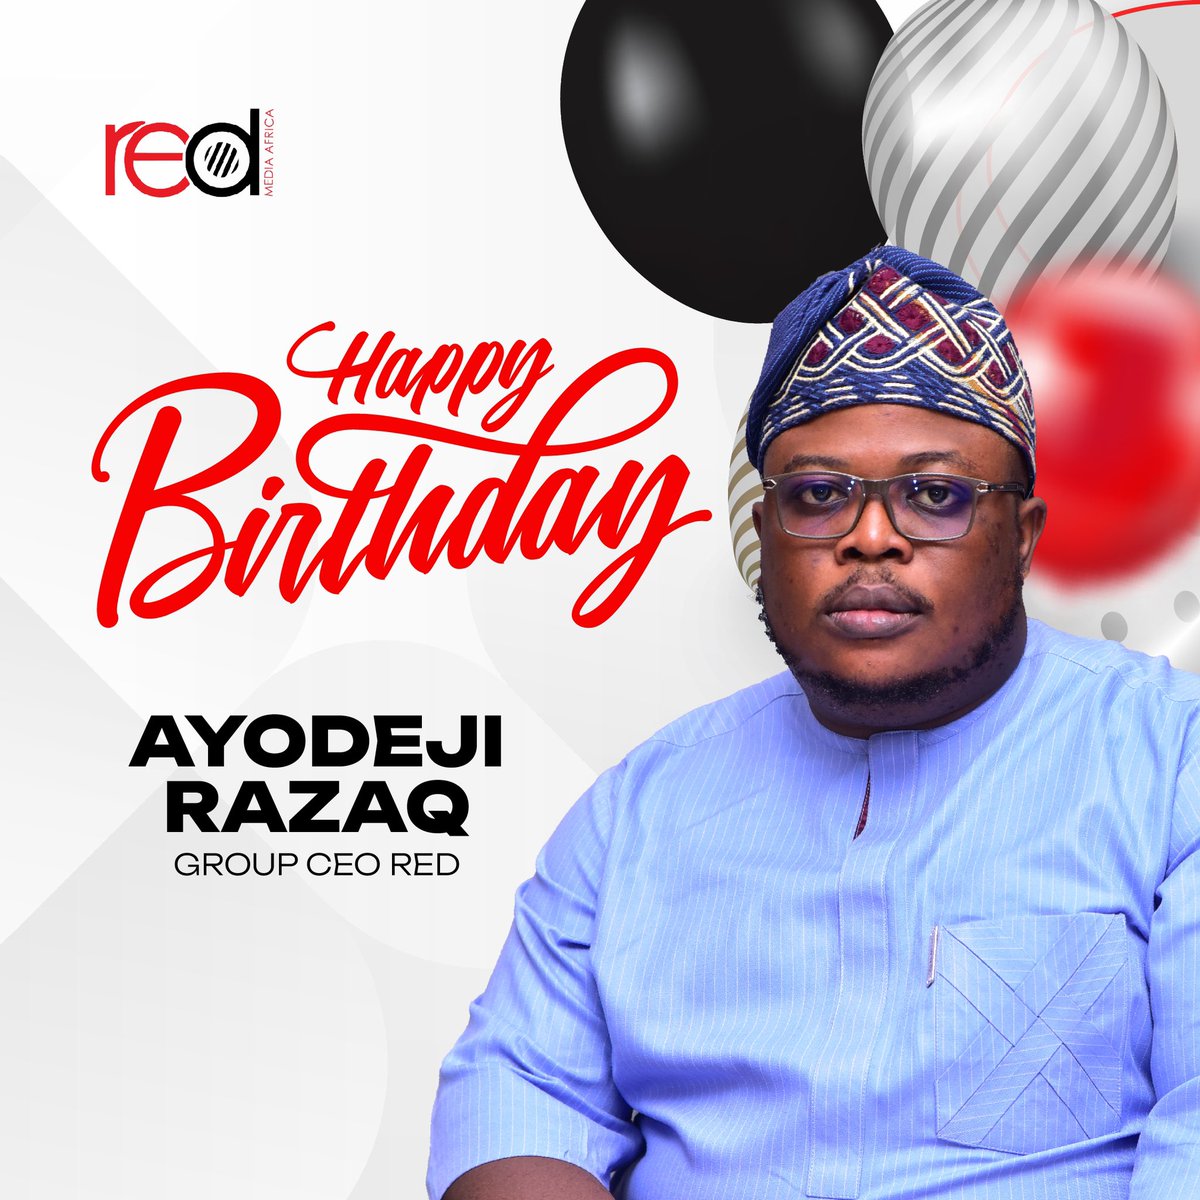 Today, we celebrate the amazing leader of the RED @dejizaq You inspire us with your vision and dedication. We wish you a fantastic birthday filled with joy and happiness. May the coming year bring you continued success and many more to come! #RedMediaAfrica #HappyBirthday